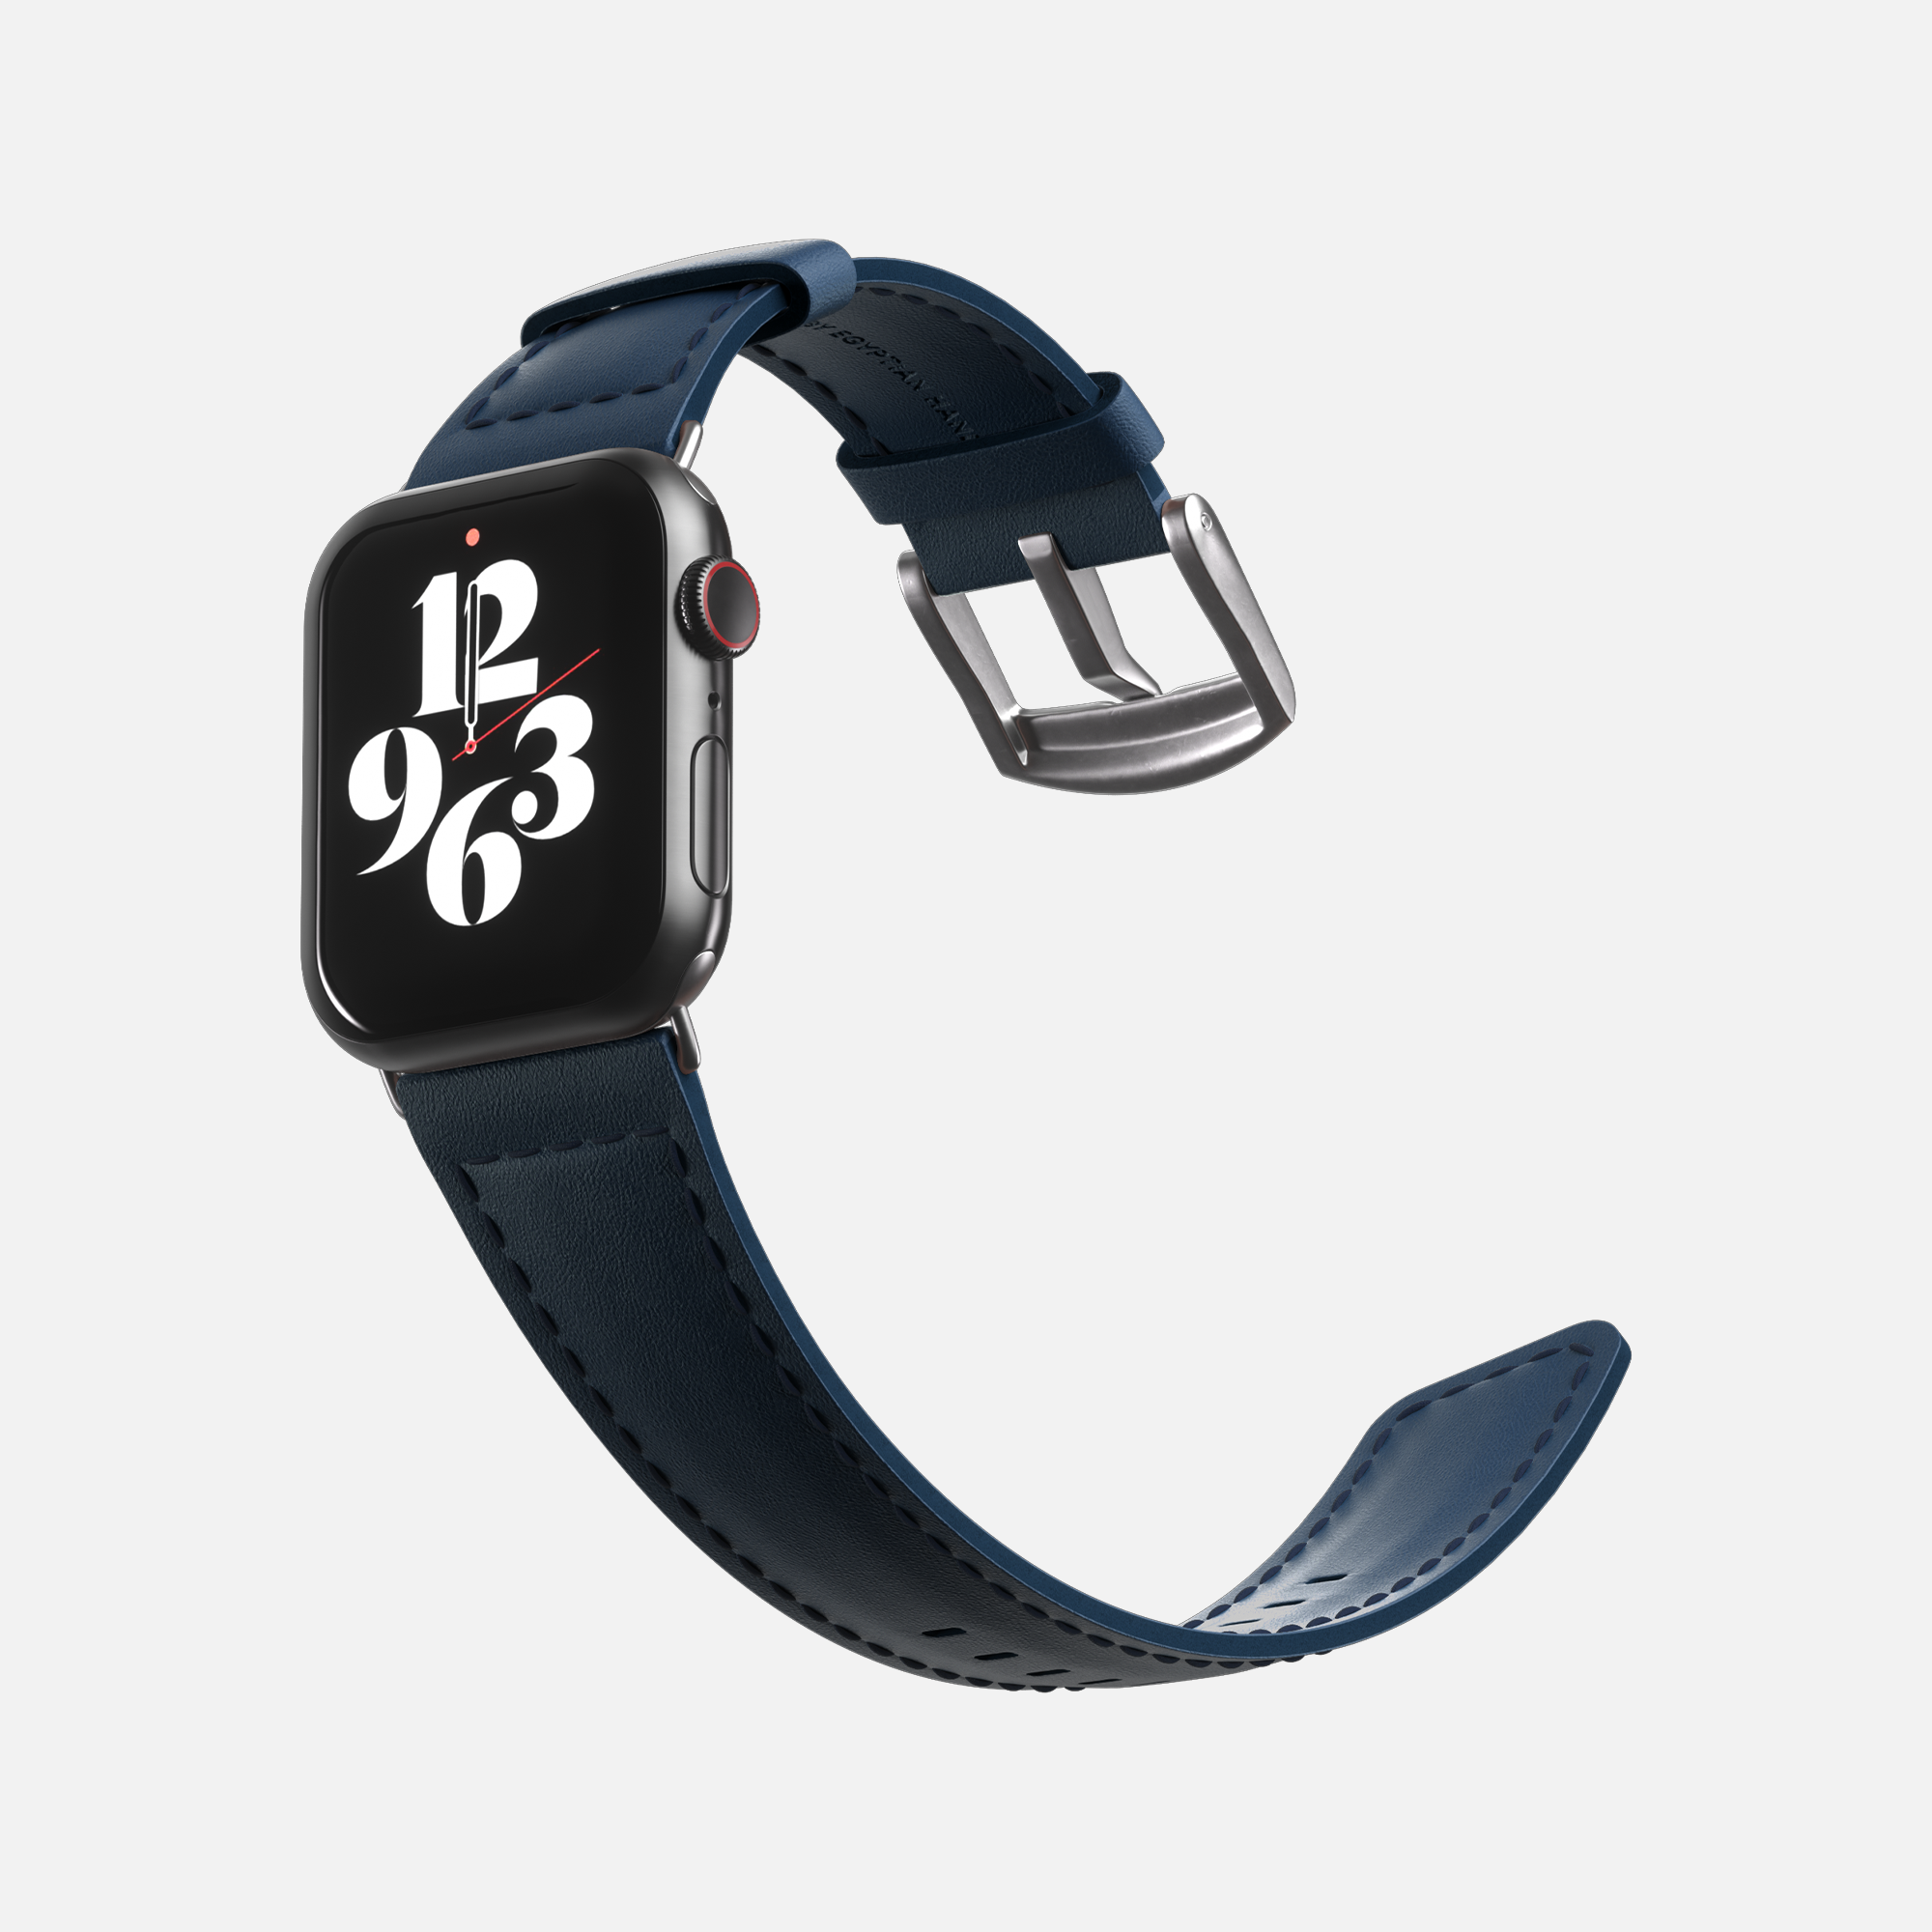 Apple Smartwatch with navy blue strap and digital clock face on a white background.